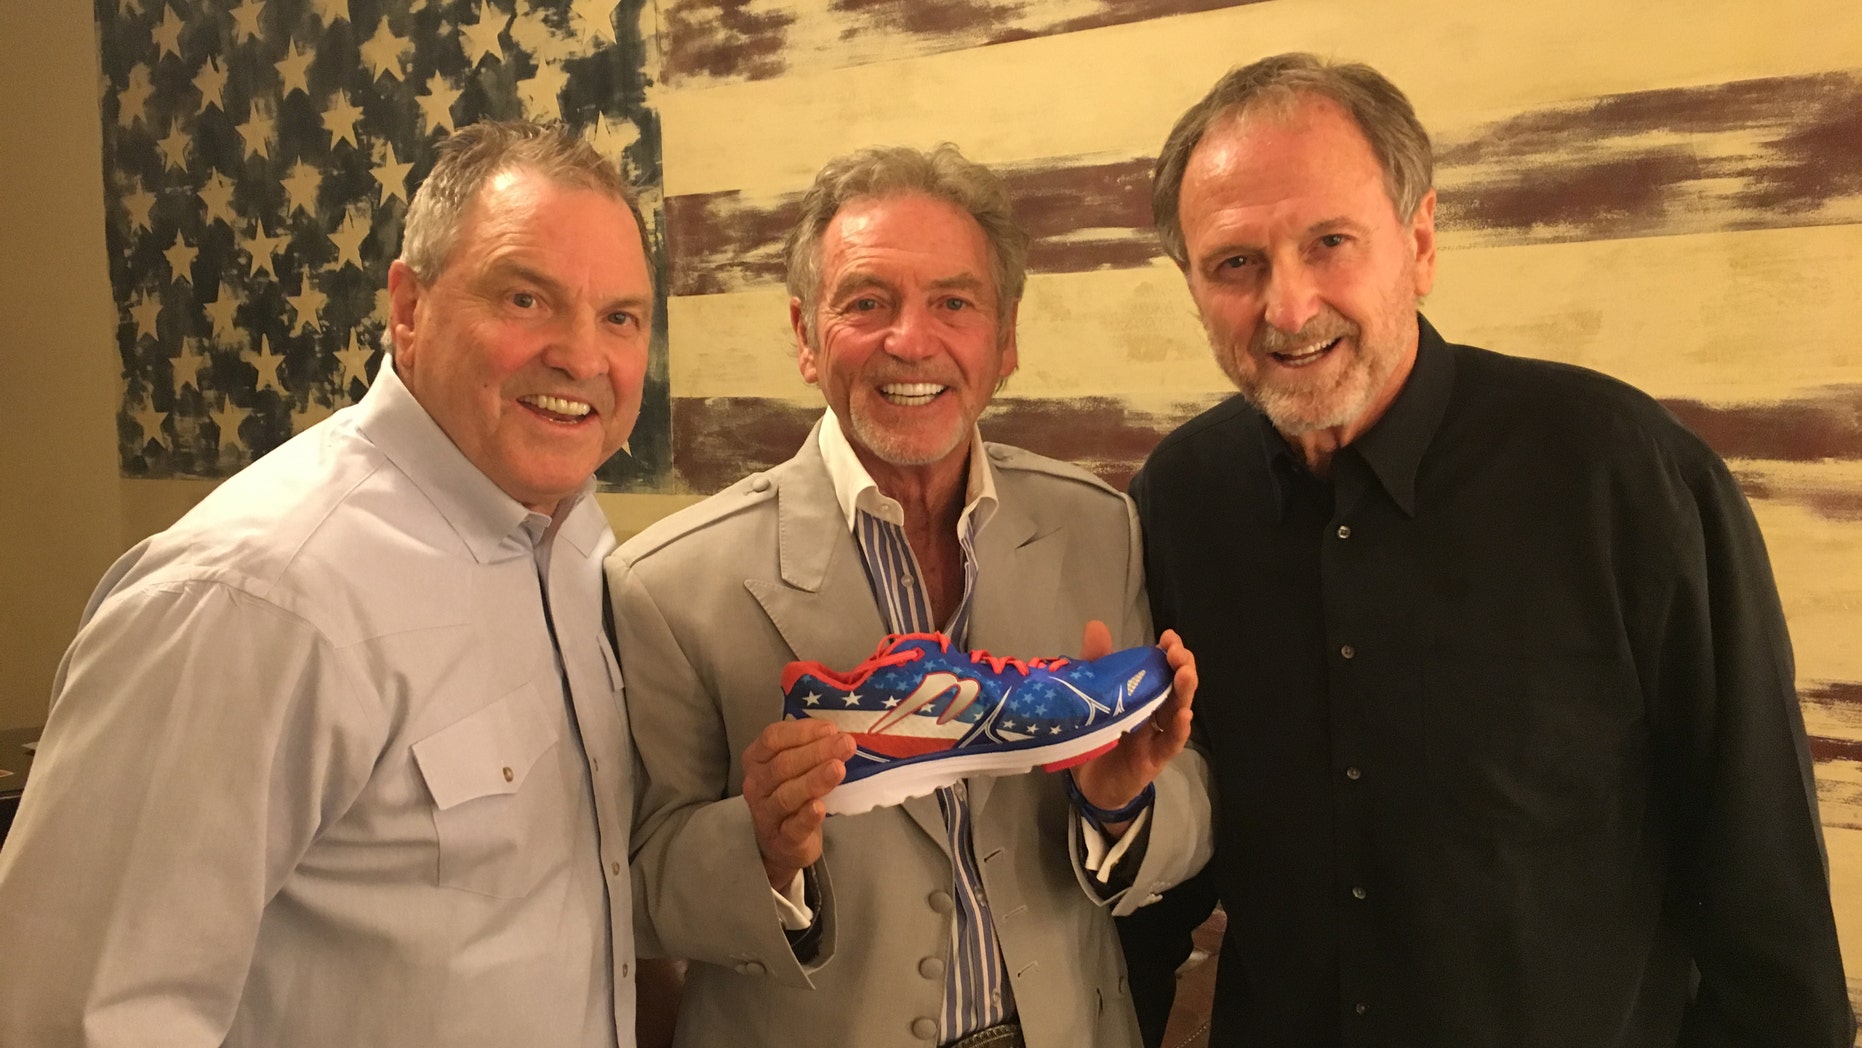 Larry Gatlin on how he's helping 